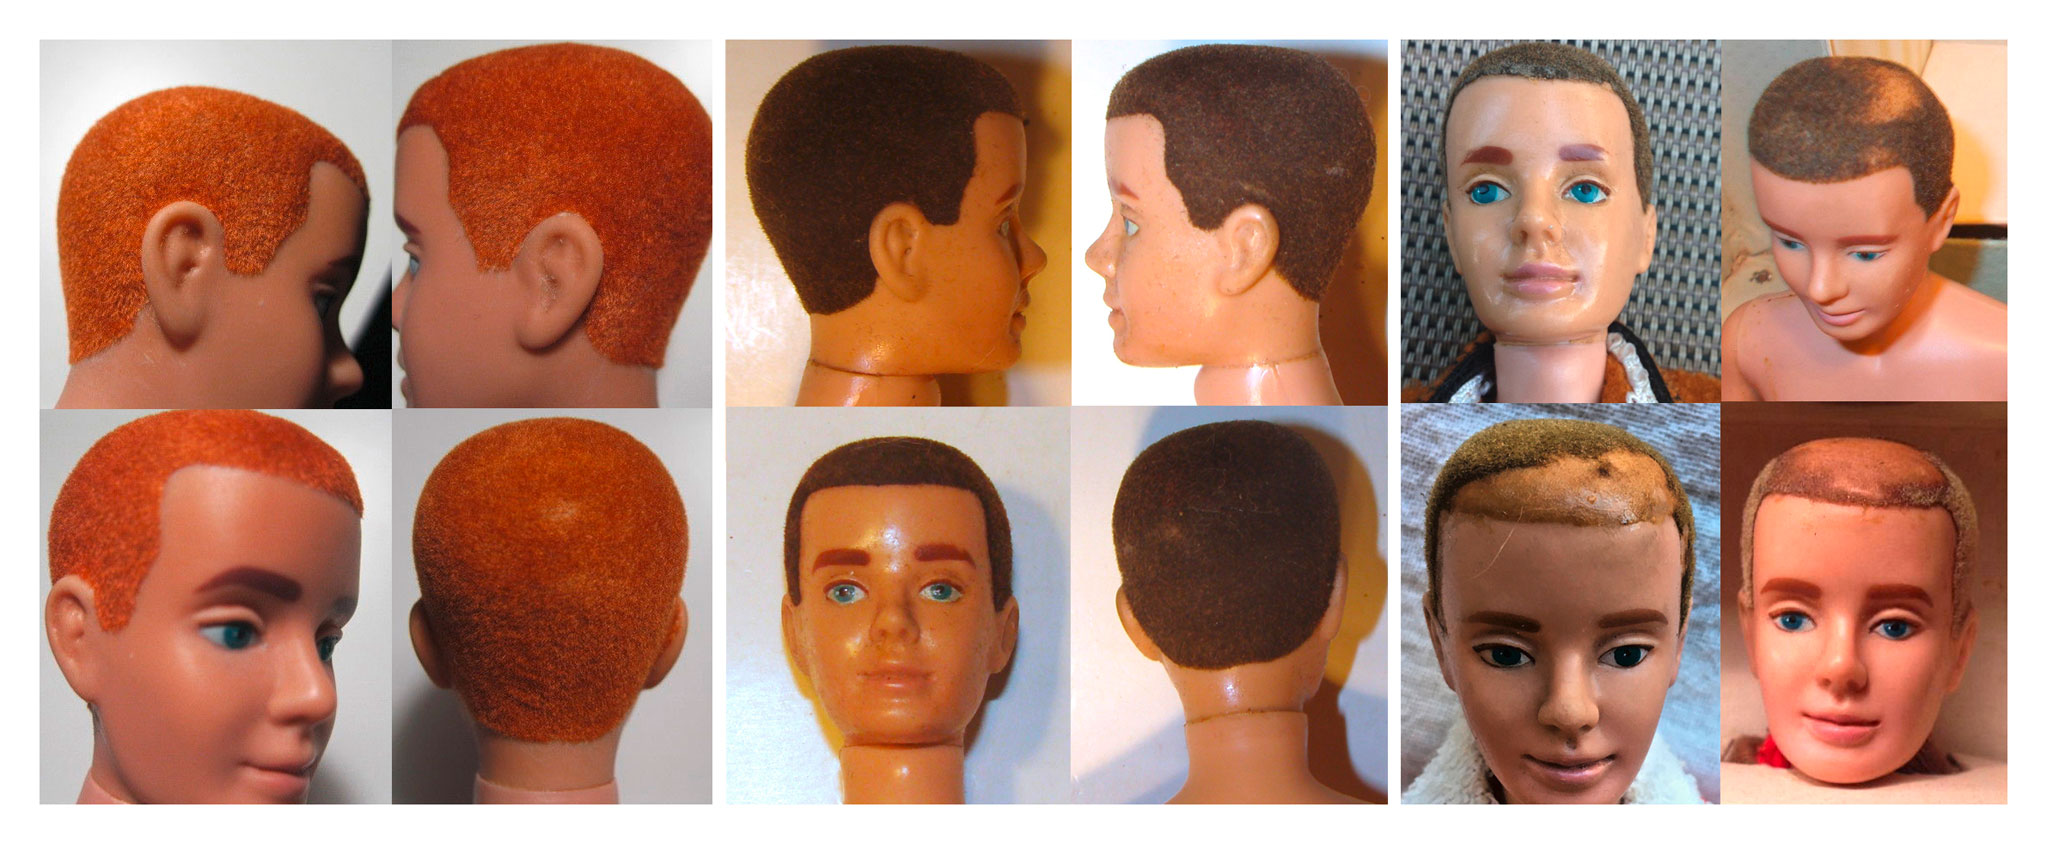 Various flocked hair Kens with unusual hair colours, which are probably just the effects of ageing